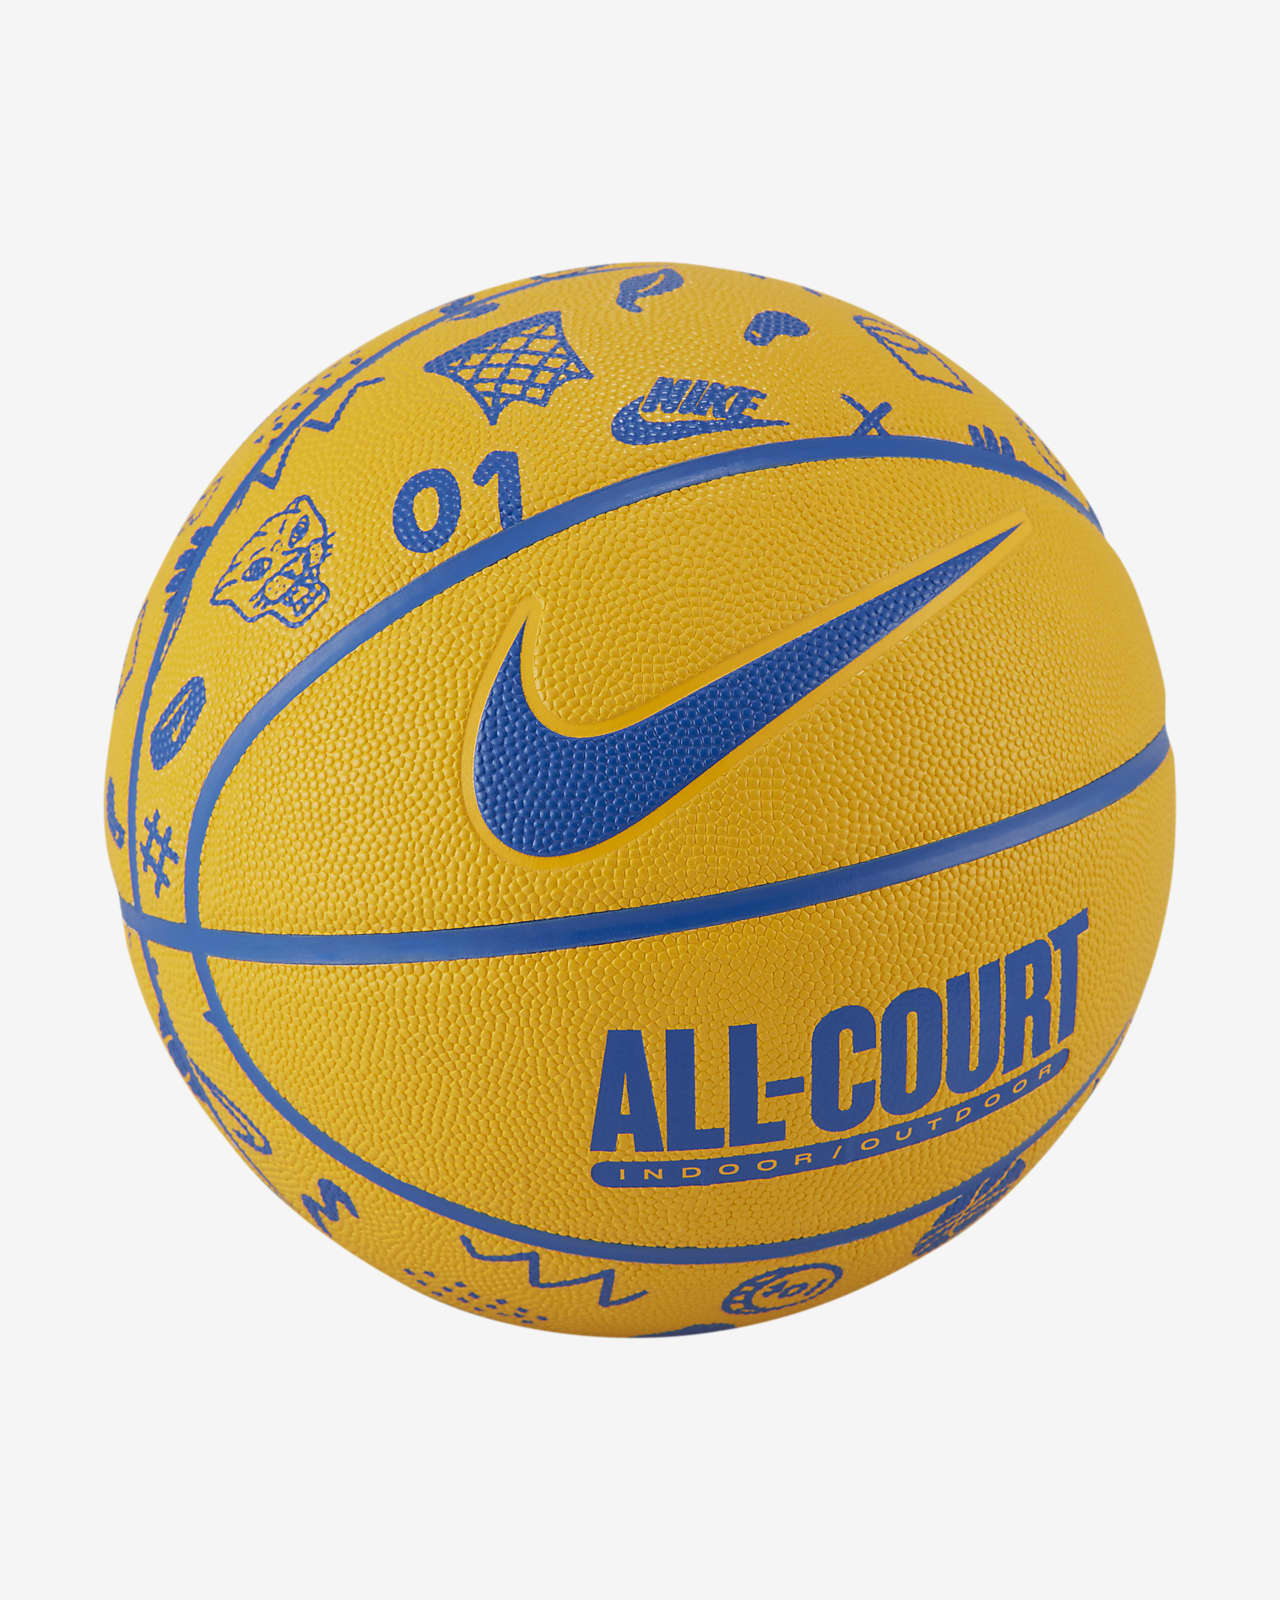 Nike Everyday All-Court 8P Graphic Basketball (Deflated)